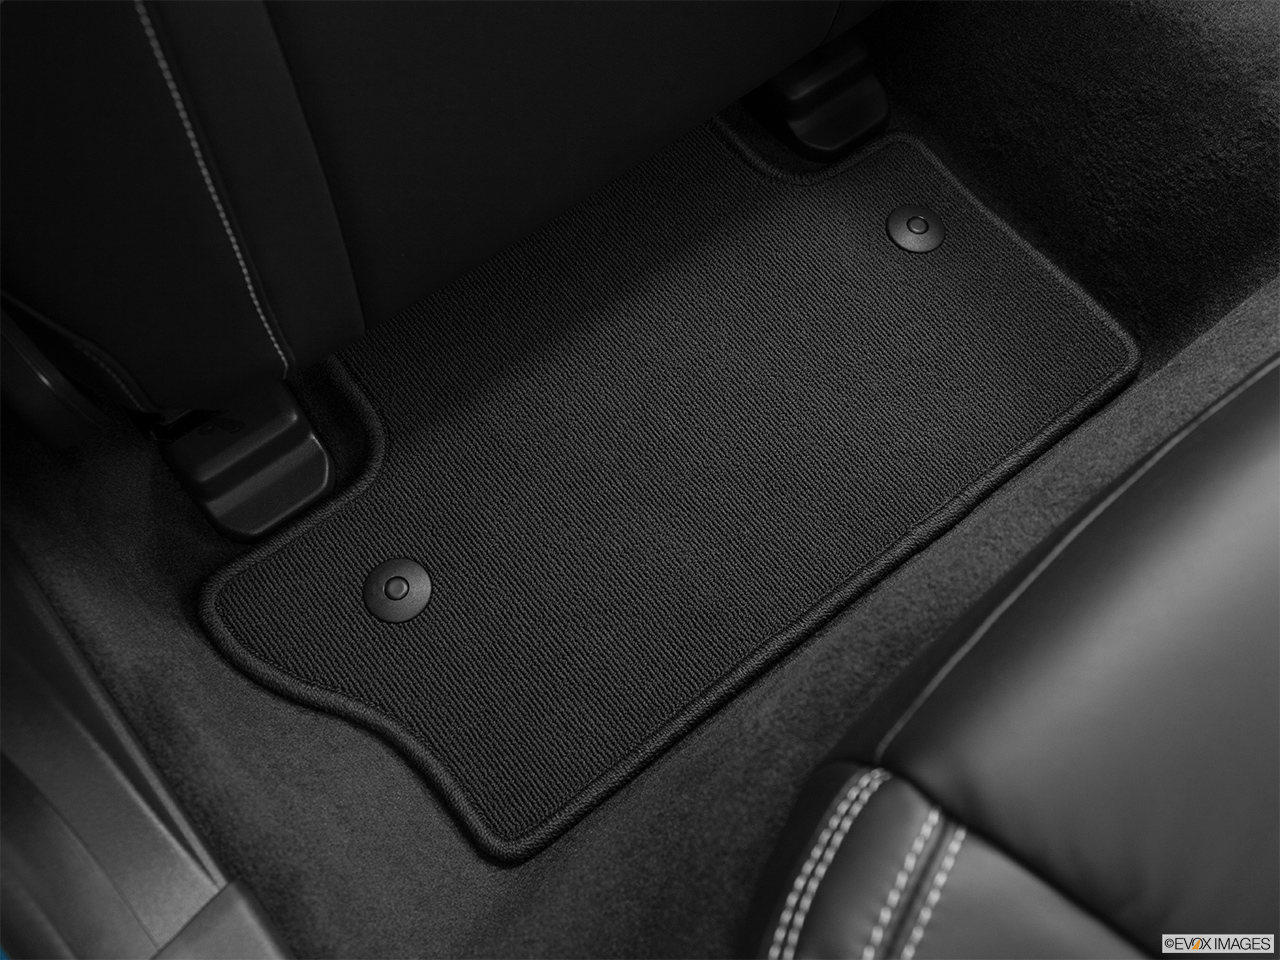 2014 Volvo S60 T5 FWD Premier Plus Rear driver's side floor mat. Mid-seat level from outside looking in. 